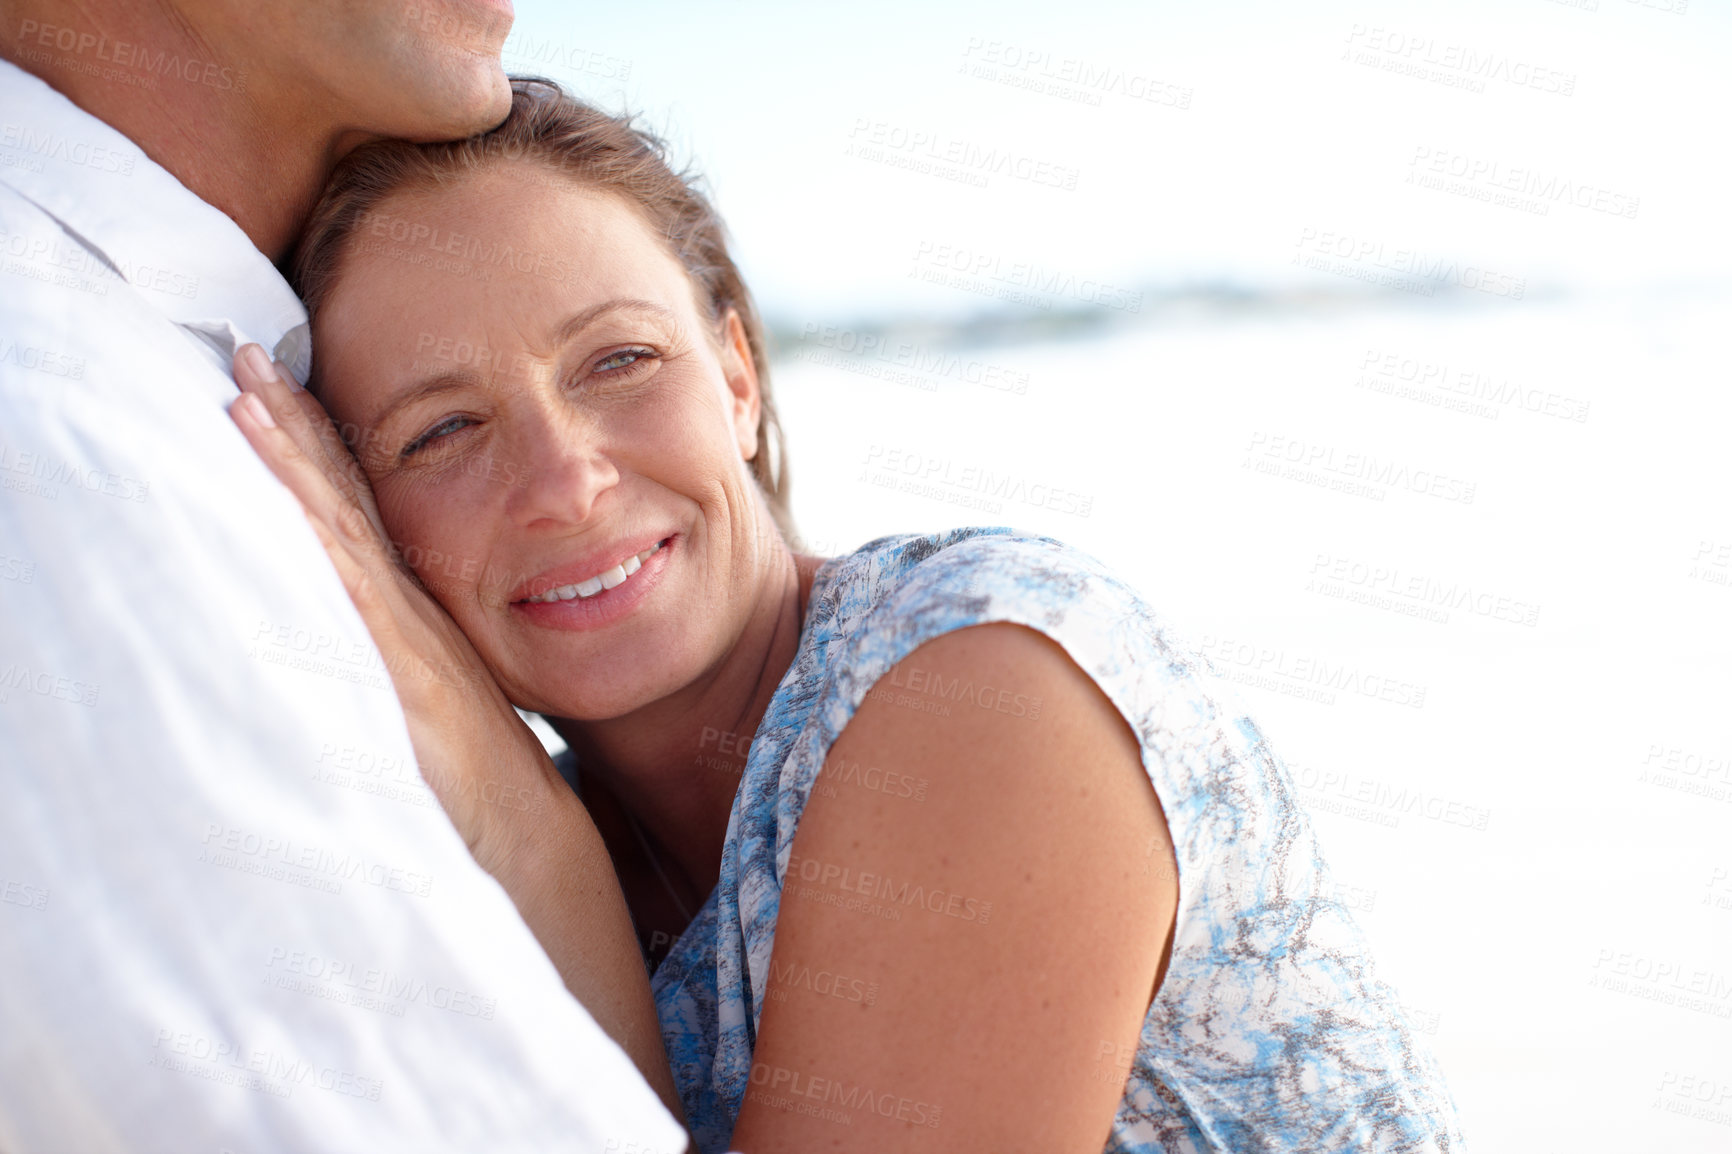 Buy stock photo A mature man embracing his happy wife from behind as they stand on the beach